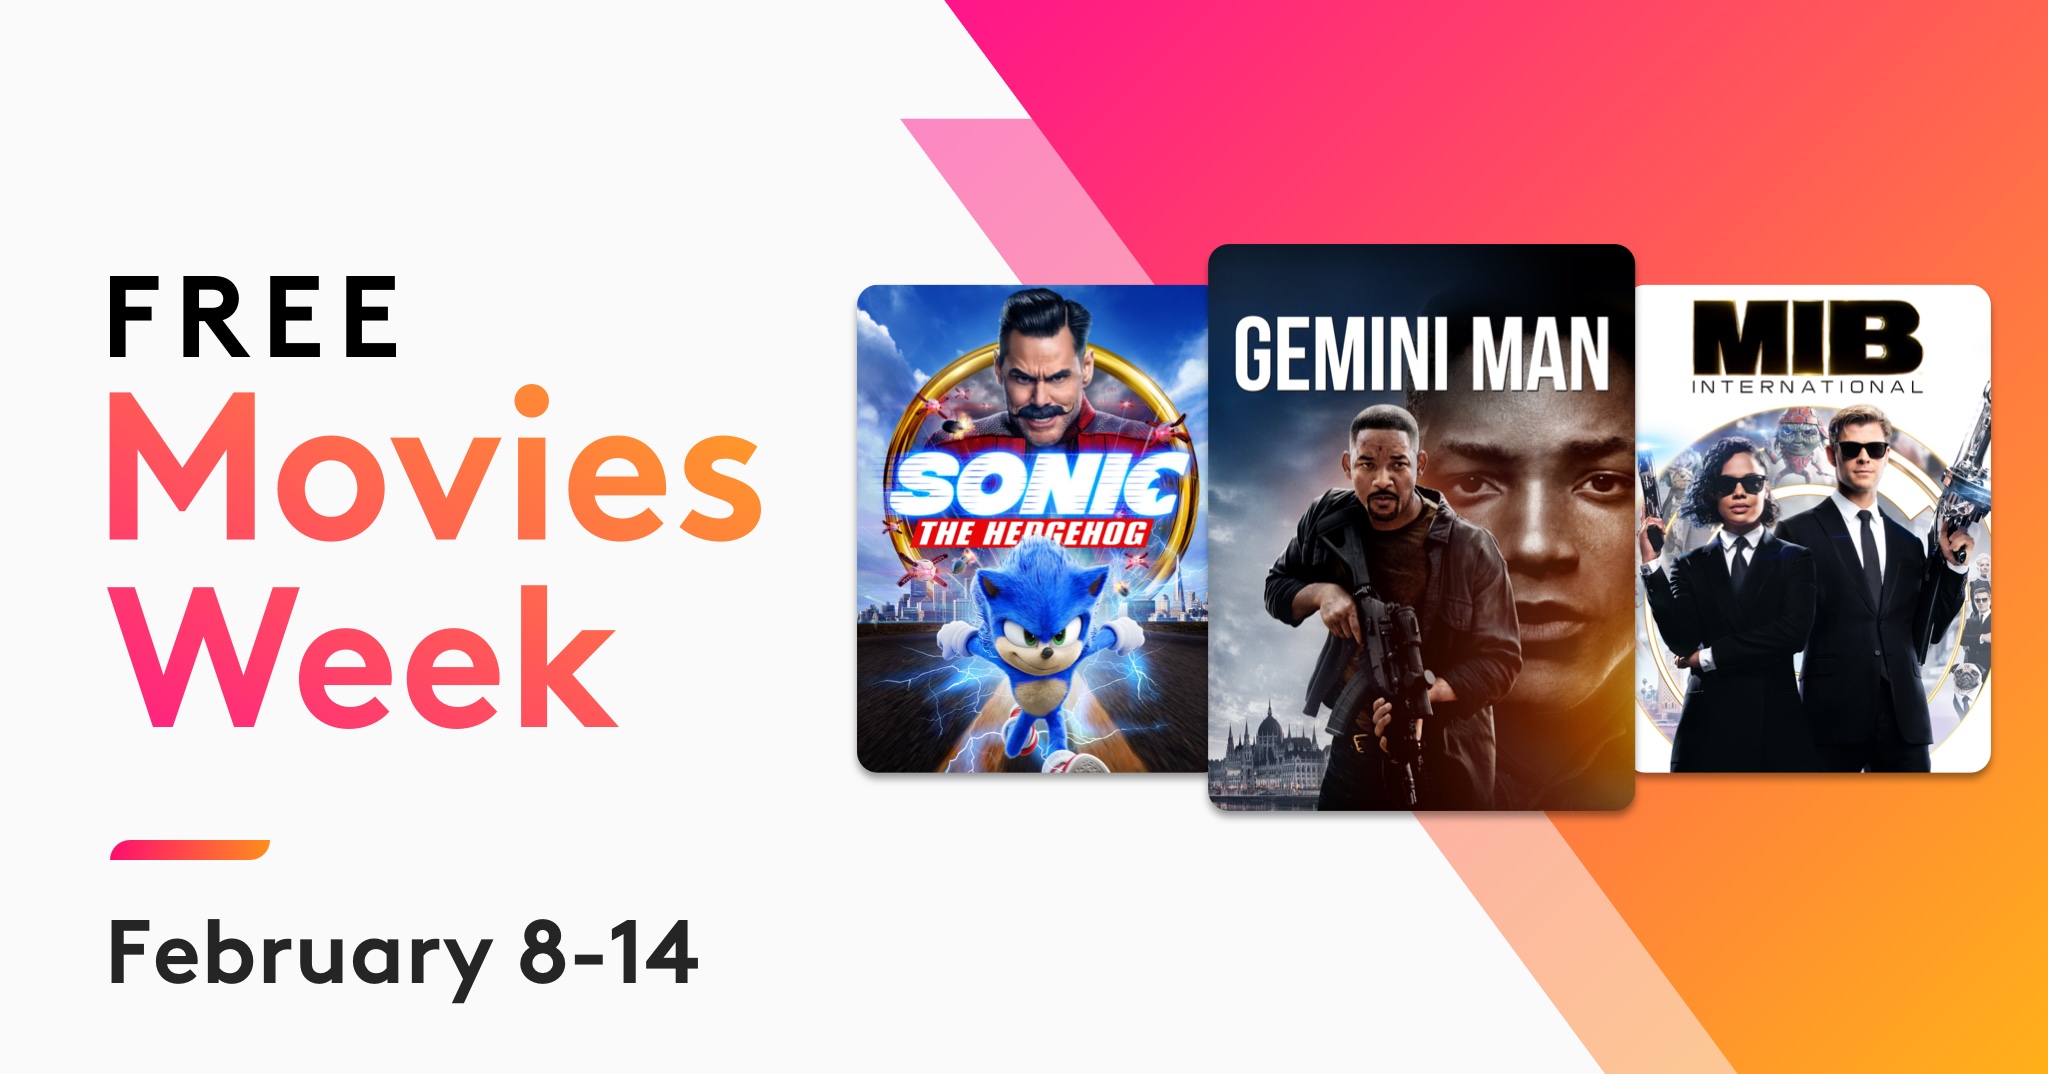 Watch Free Movies All Week Long from February 8 14 with Xfinity!